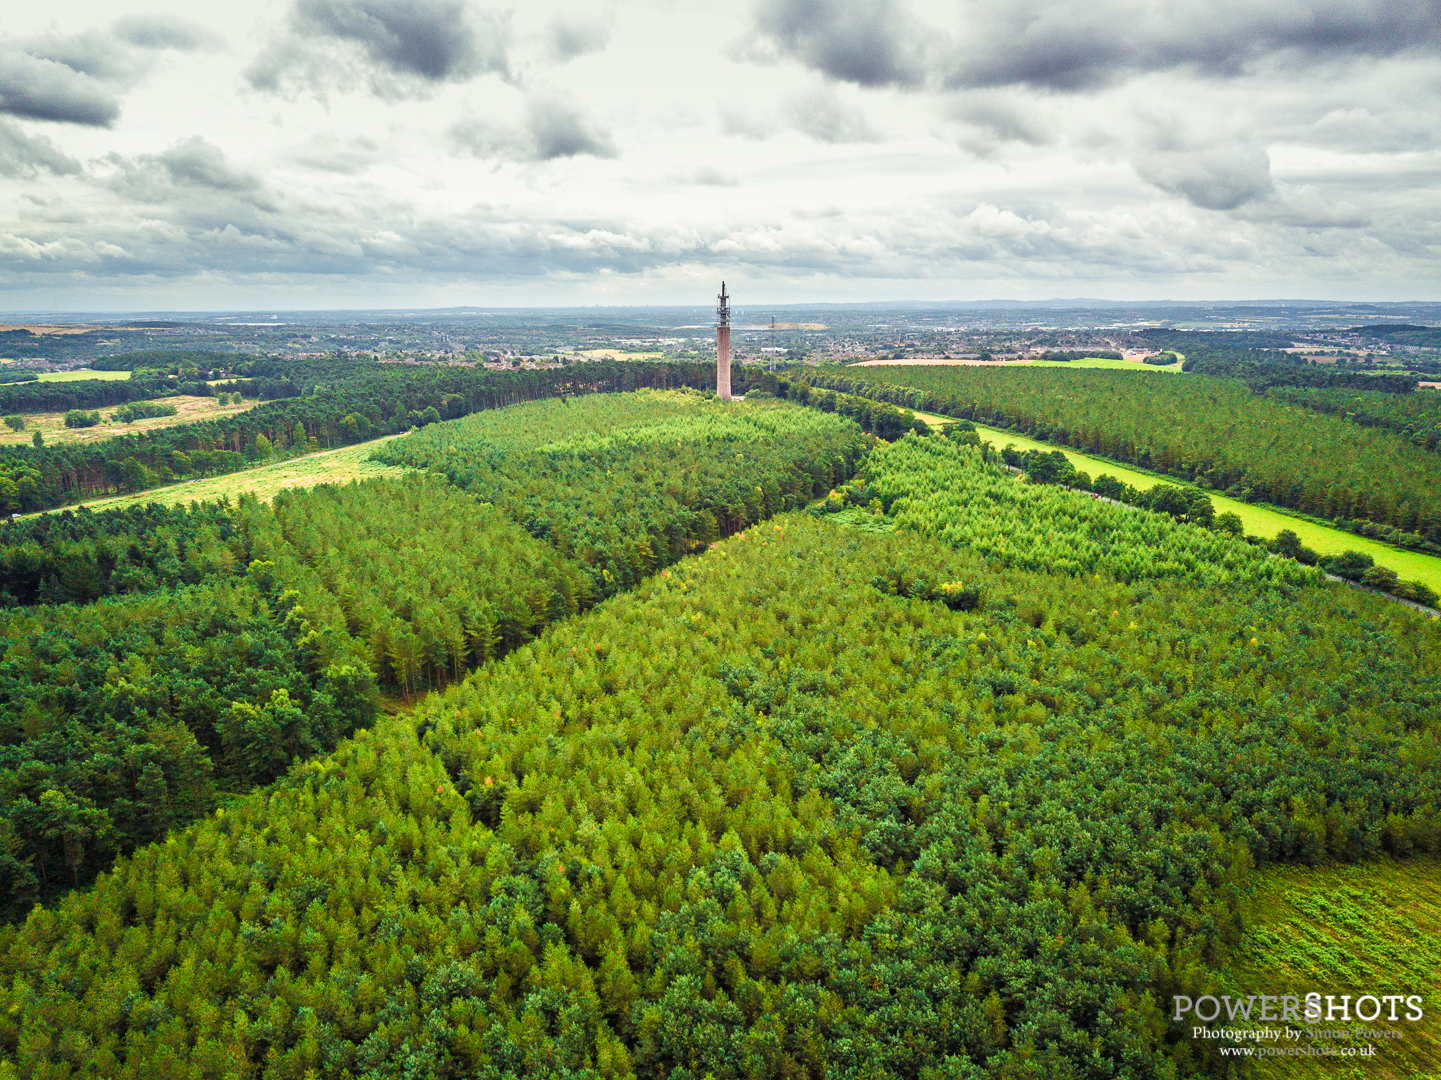 Cannock Chase BT Tower